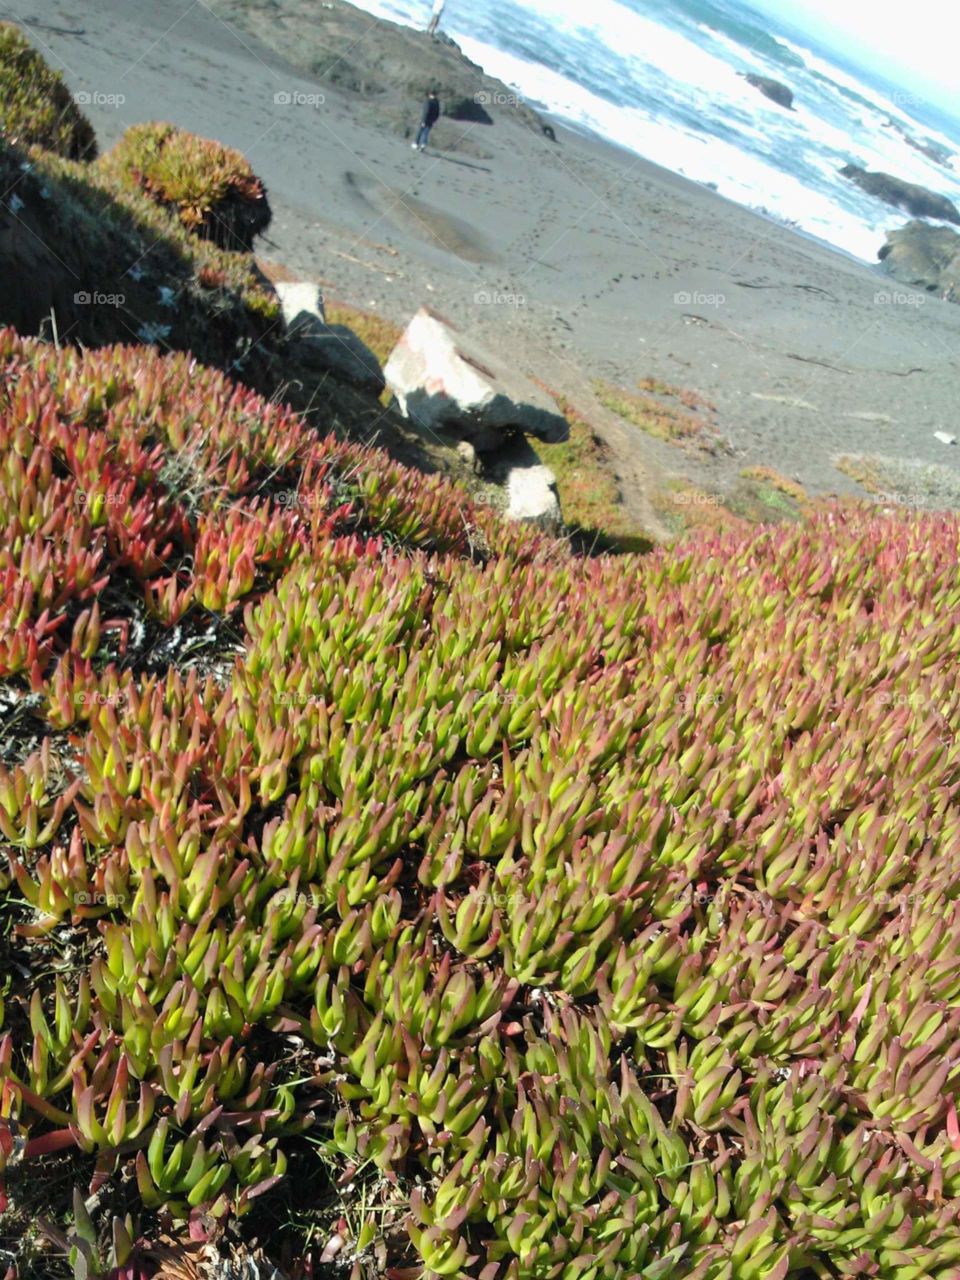 Local flora on the beach of Fort Bragg, CA right up next to the ocean